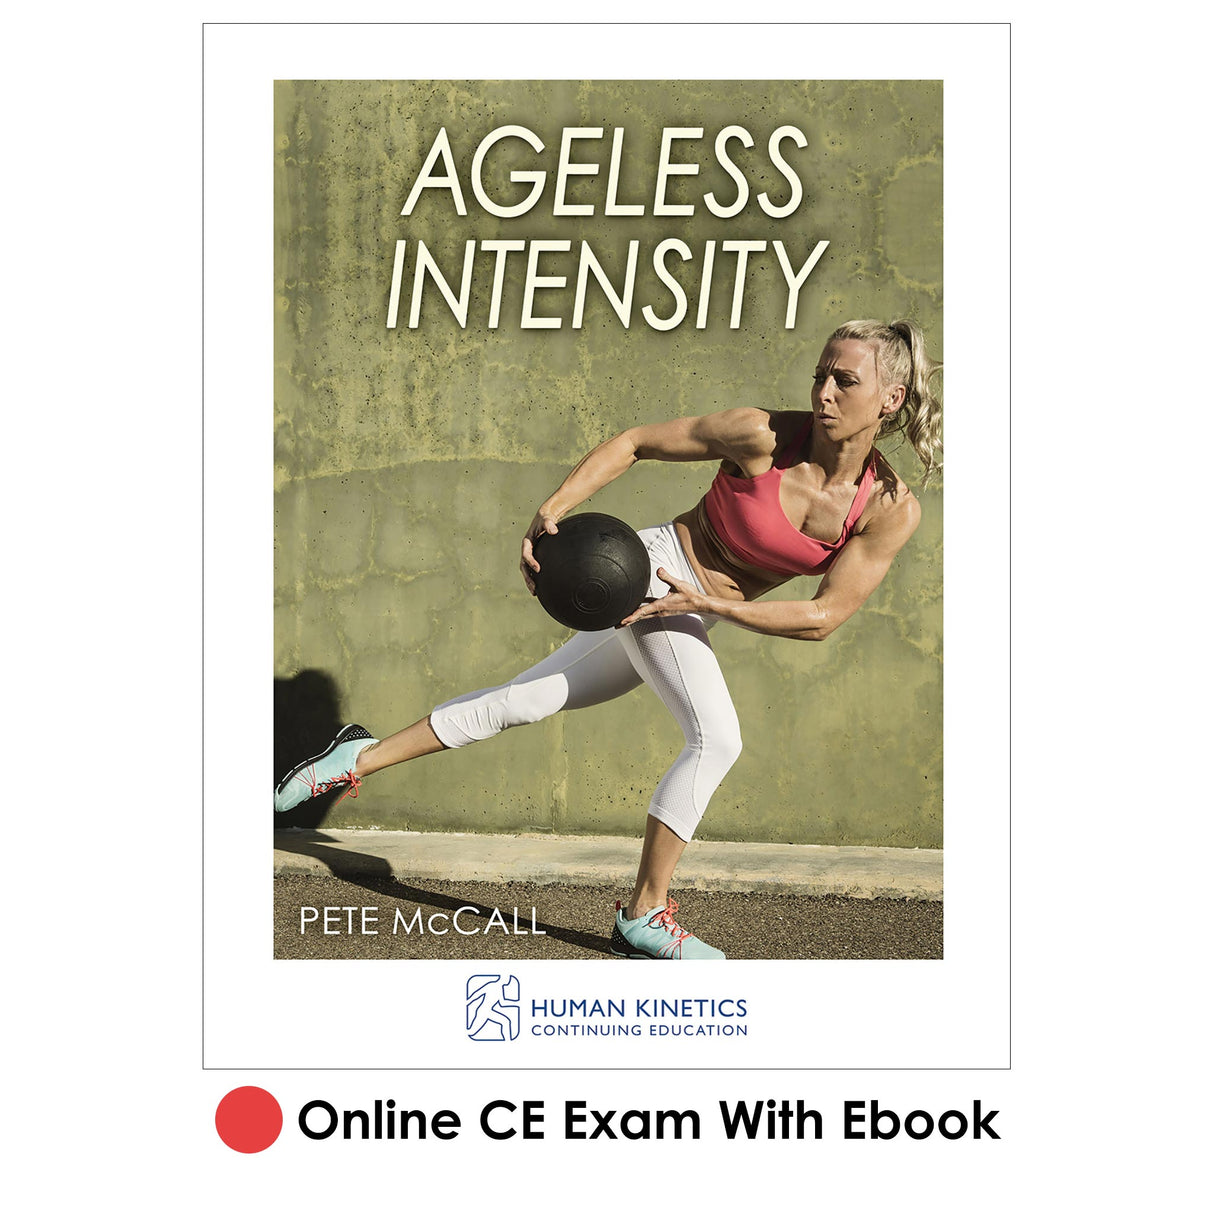 Ageless Intensity Online CE Exam With Ebook